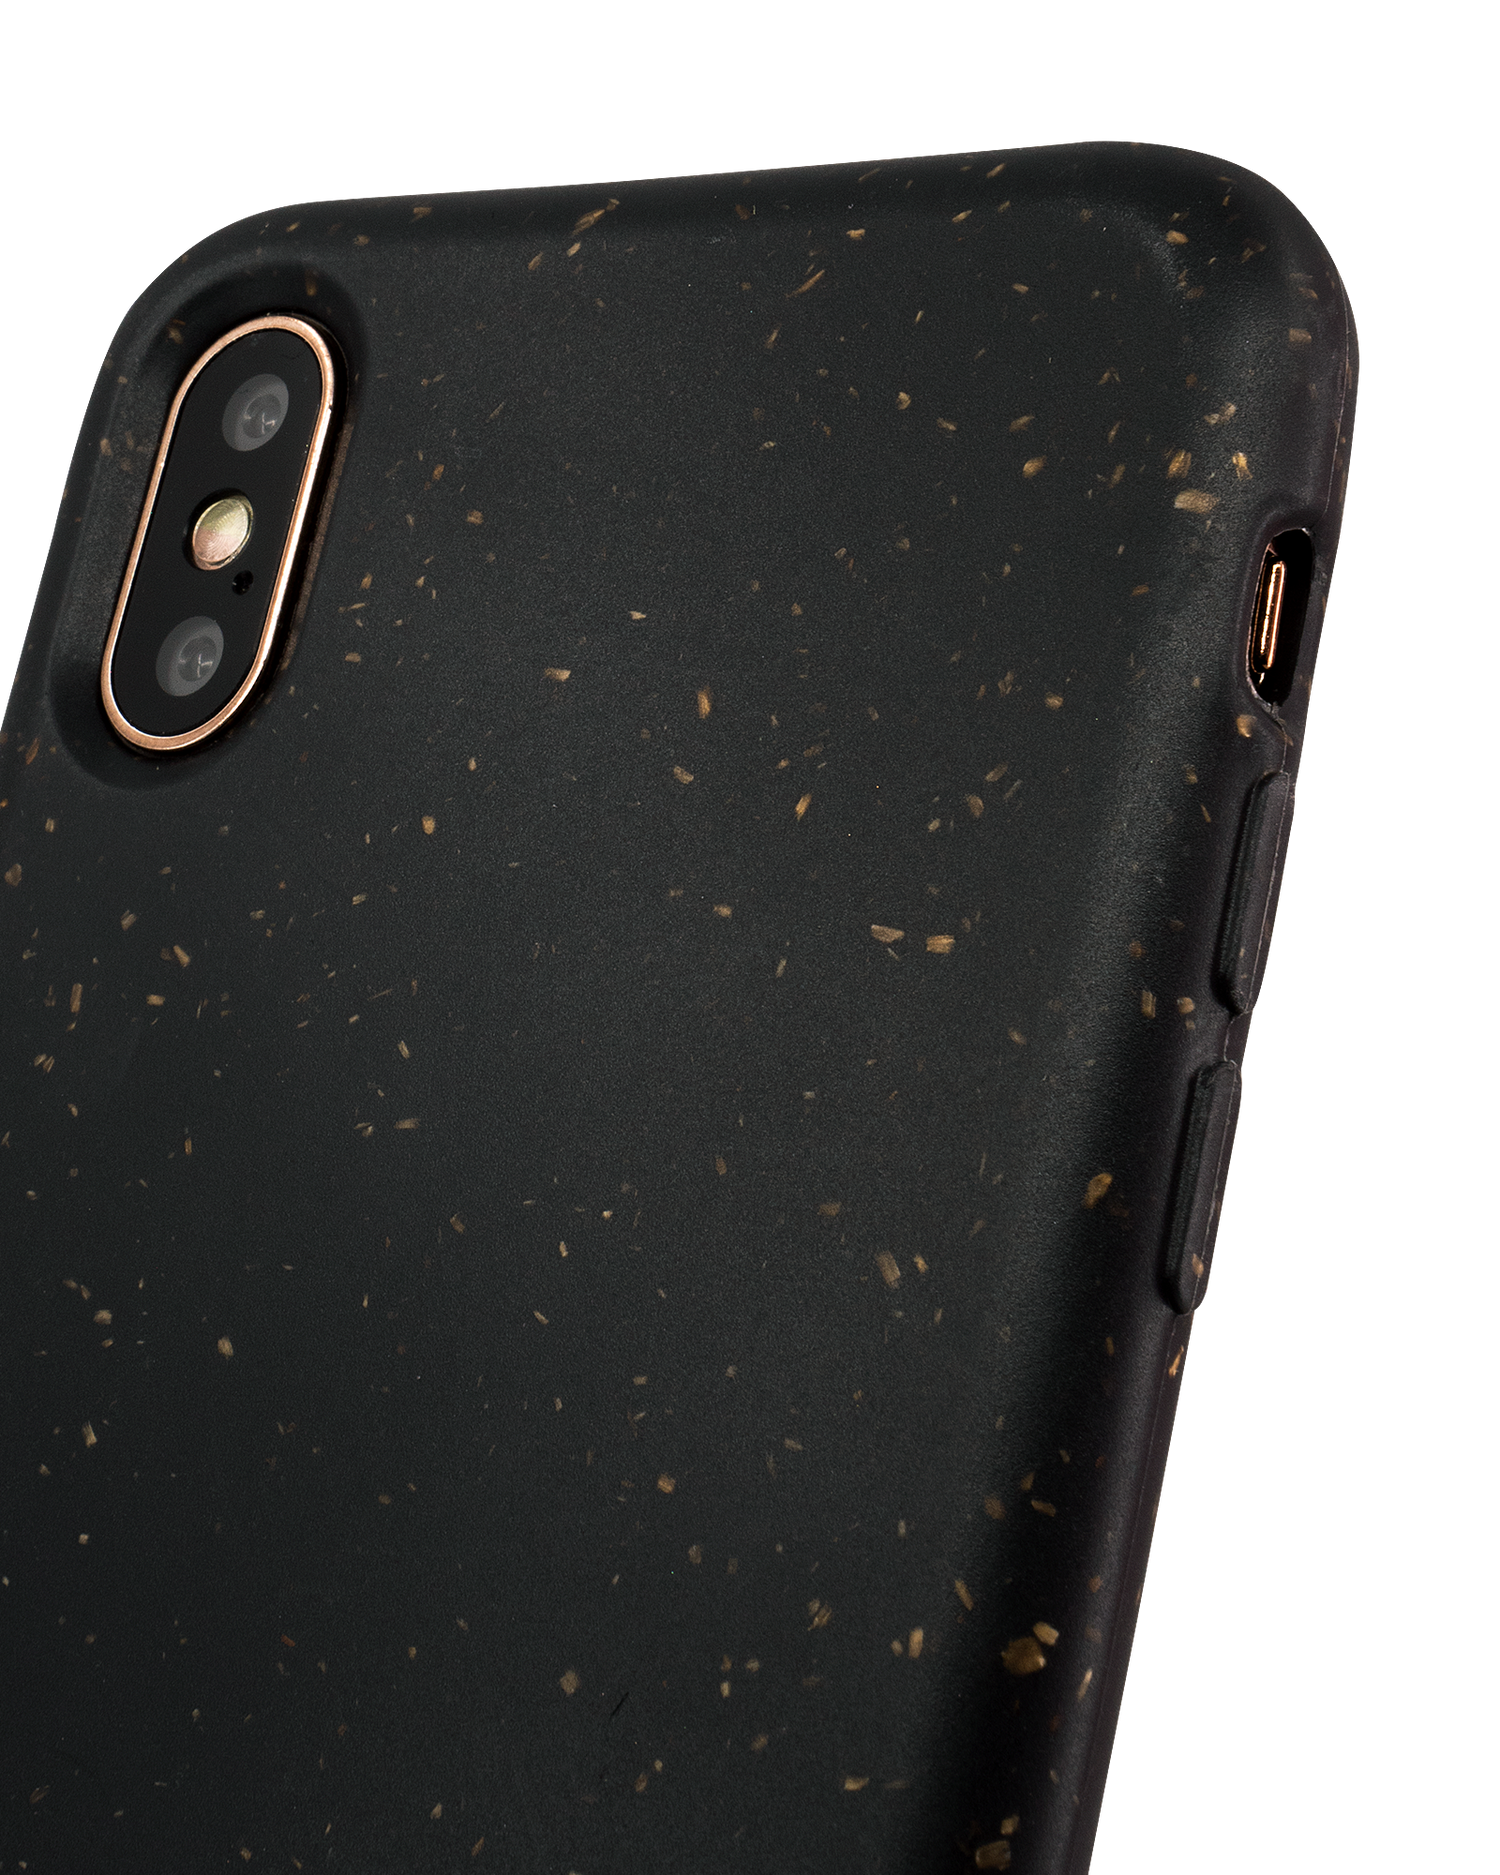 Black Eco-Friendly Phone Case for Apple iPhone X, Apple iPhone XS: Details inside